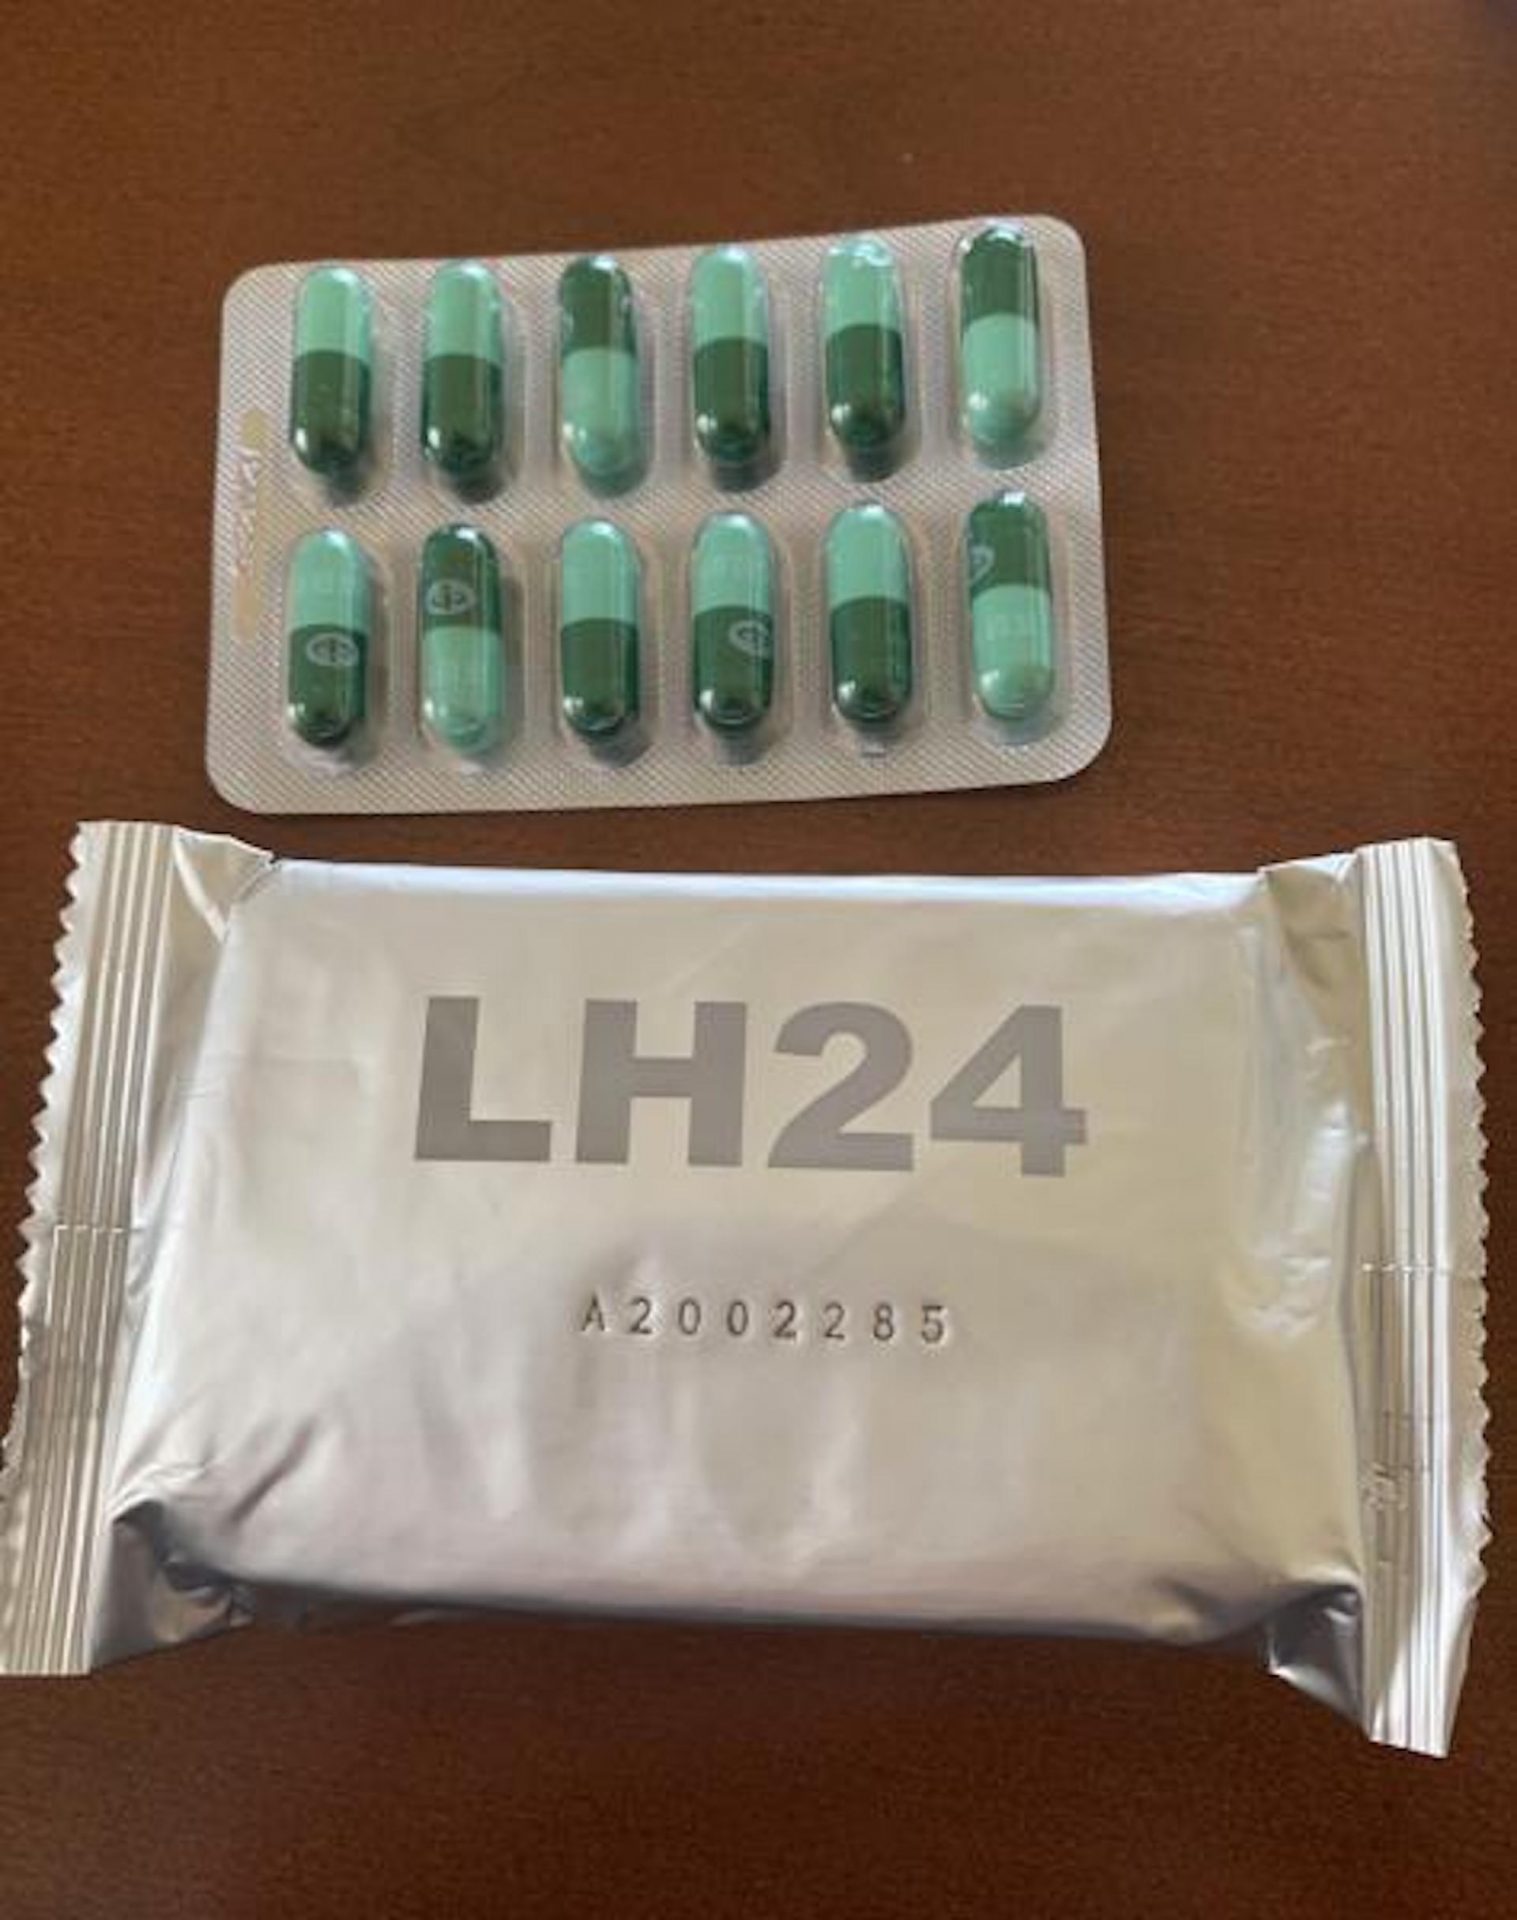 While inspecting international express delivery parcels Tuesday, officers at the Port of Harrisburg seized a shipment of 1,200 Linhua Qingwen capsules that arrived from Hong Kong.